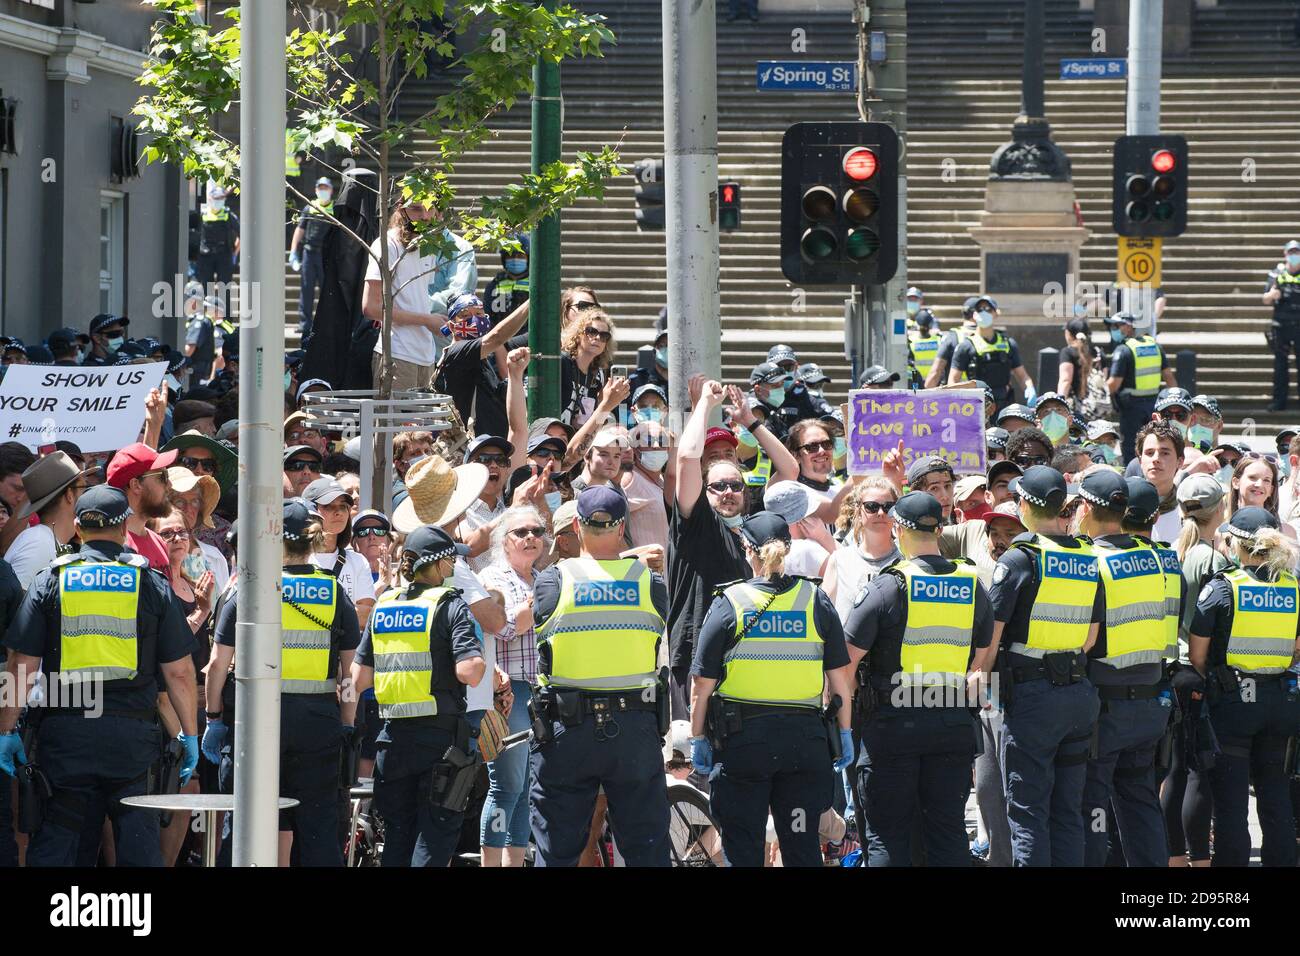 Melbourne, Australia 03 Nov 2020, police encircle protests before arresting them to process and fine them in front the state parliament during another Freedom Day demonstration on Melbourne Cup Day demanding the sacking of Premier Daniel Andrews over lockdown laws. Credit: Michael Currie/Alamy Live News Stock Photo